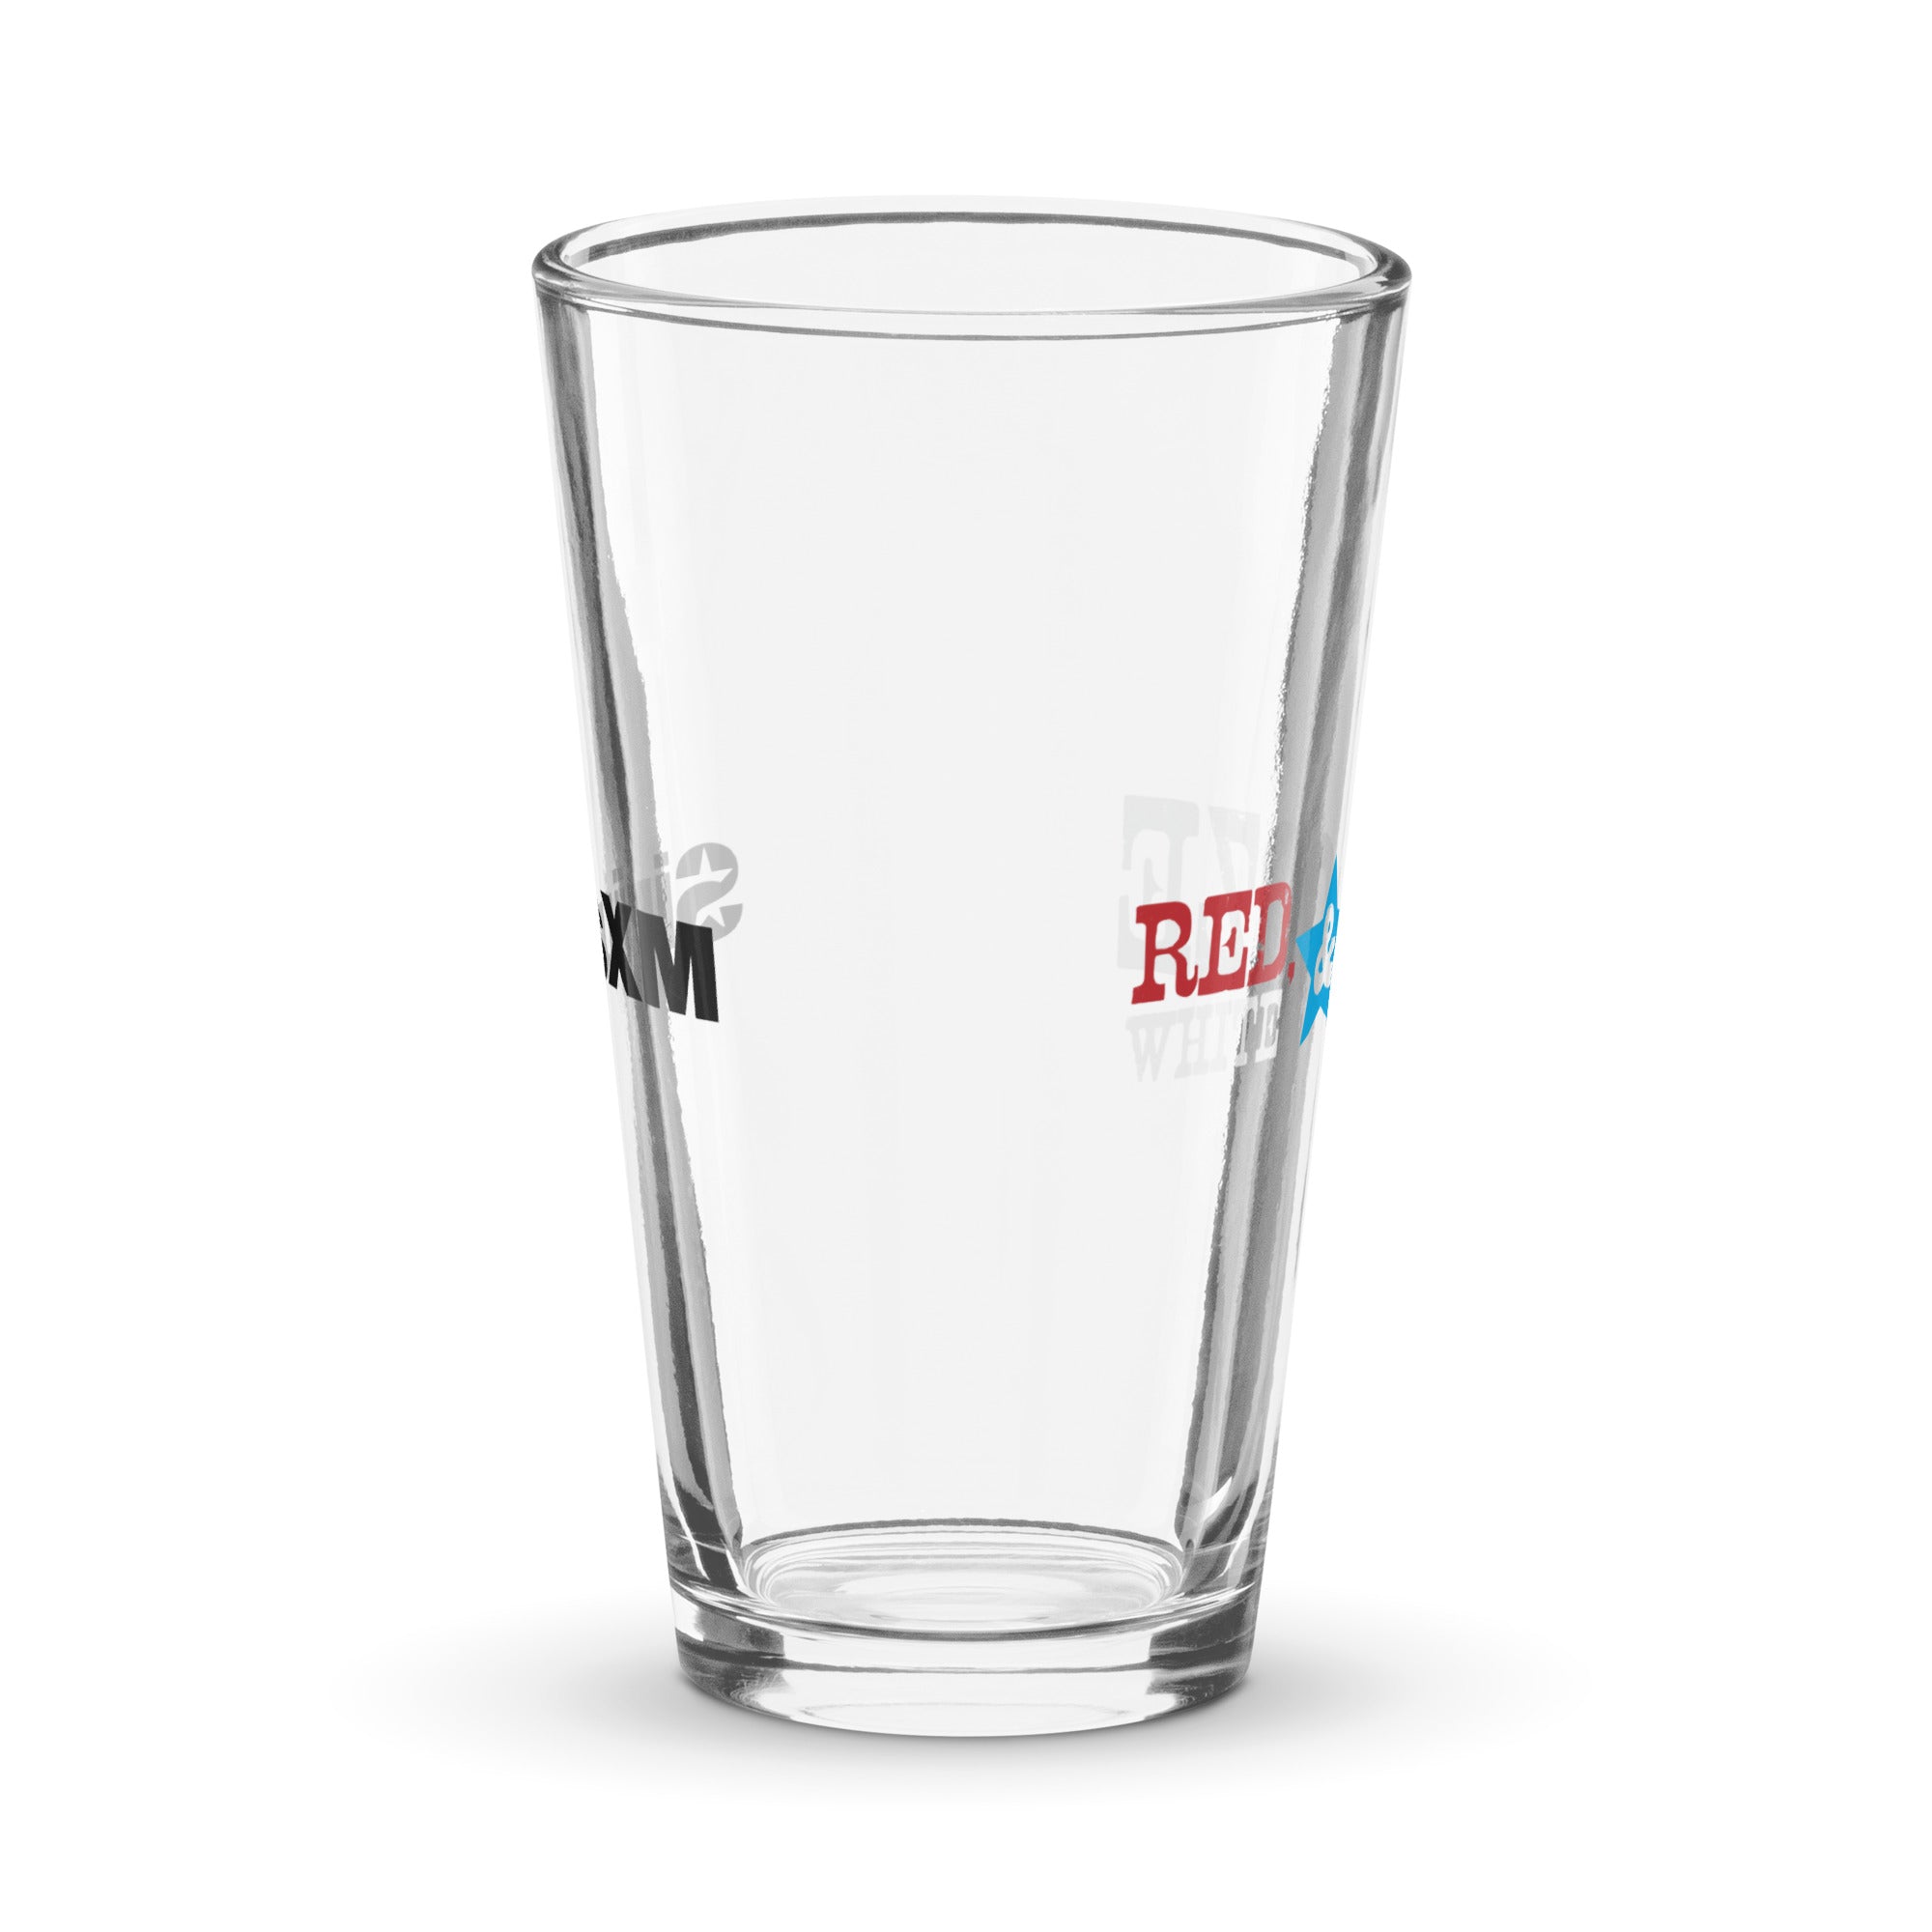 Red White & Booze: Pint Glass